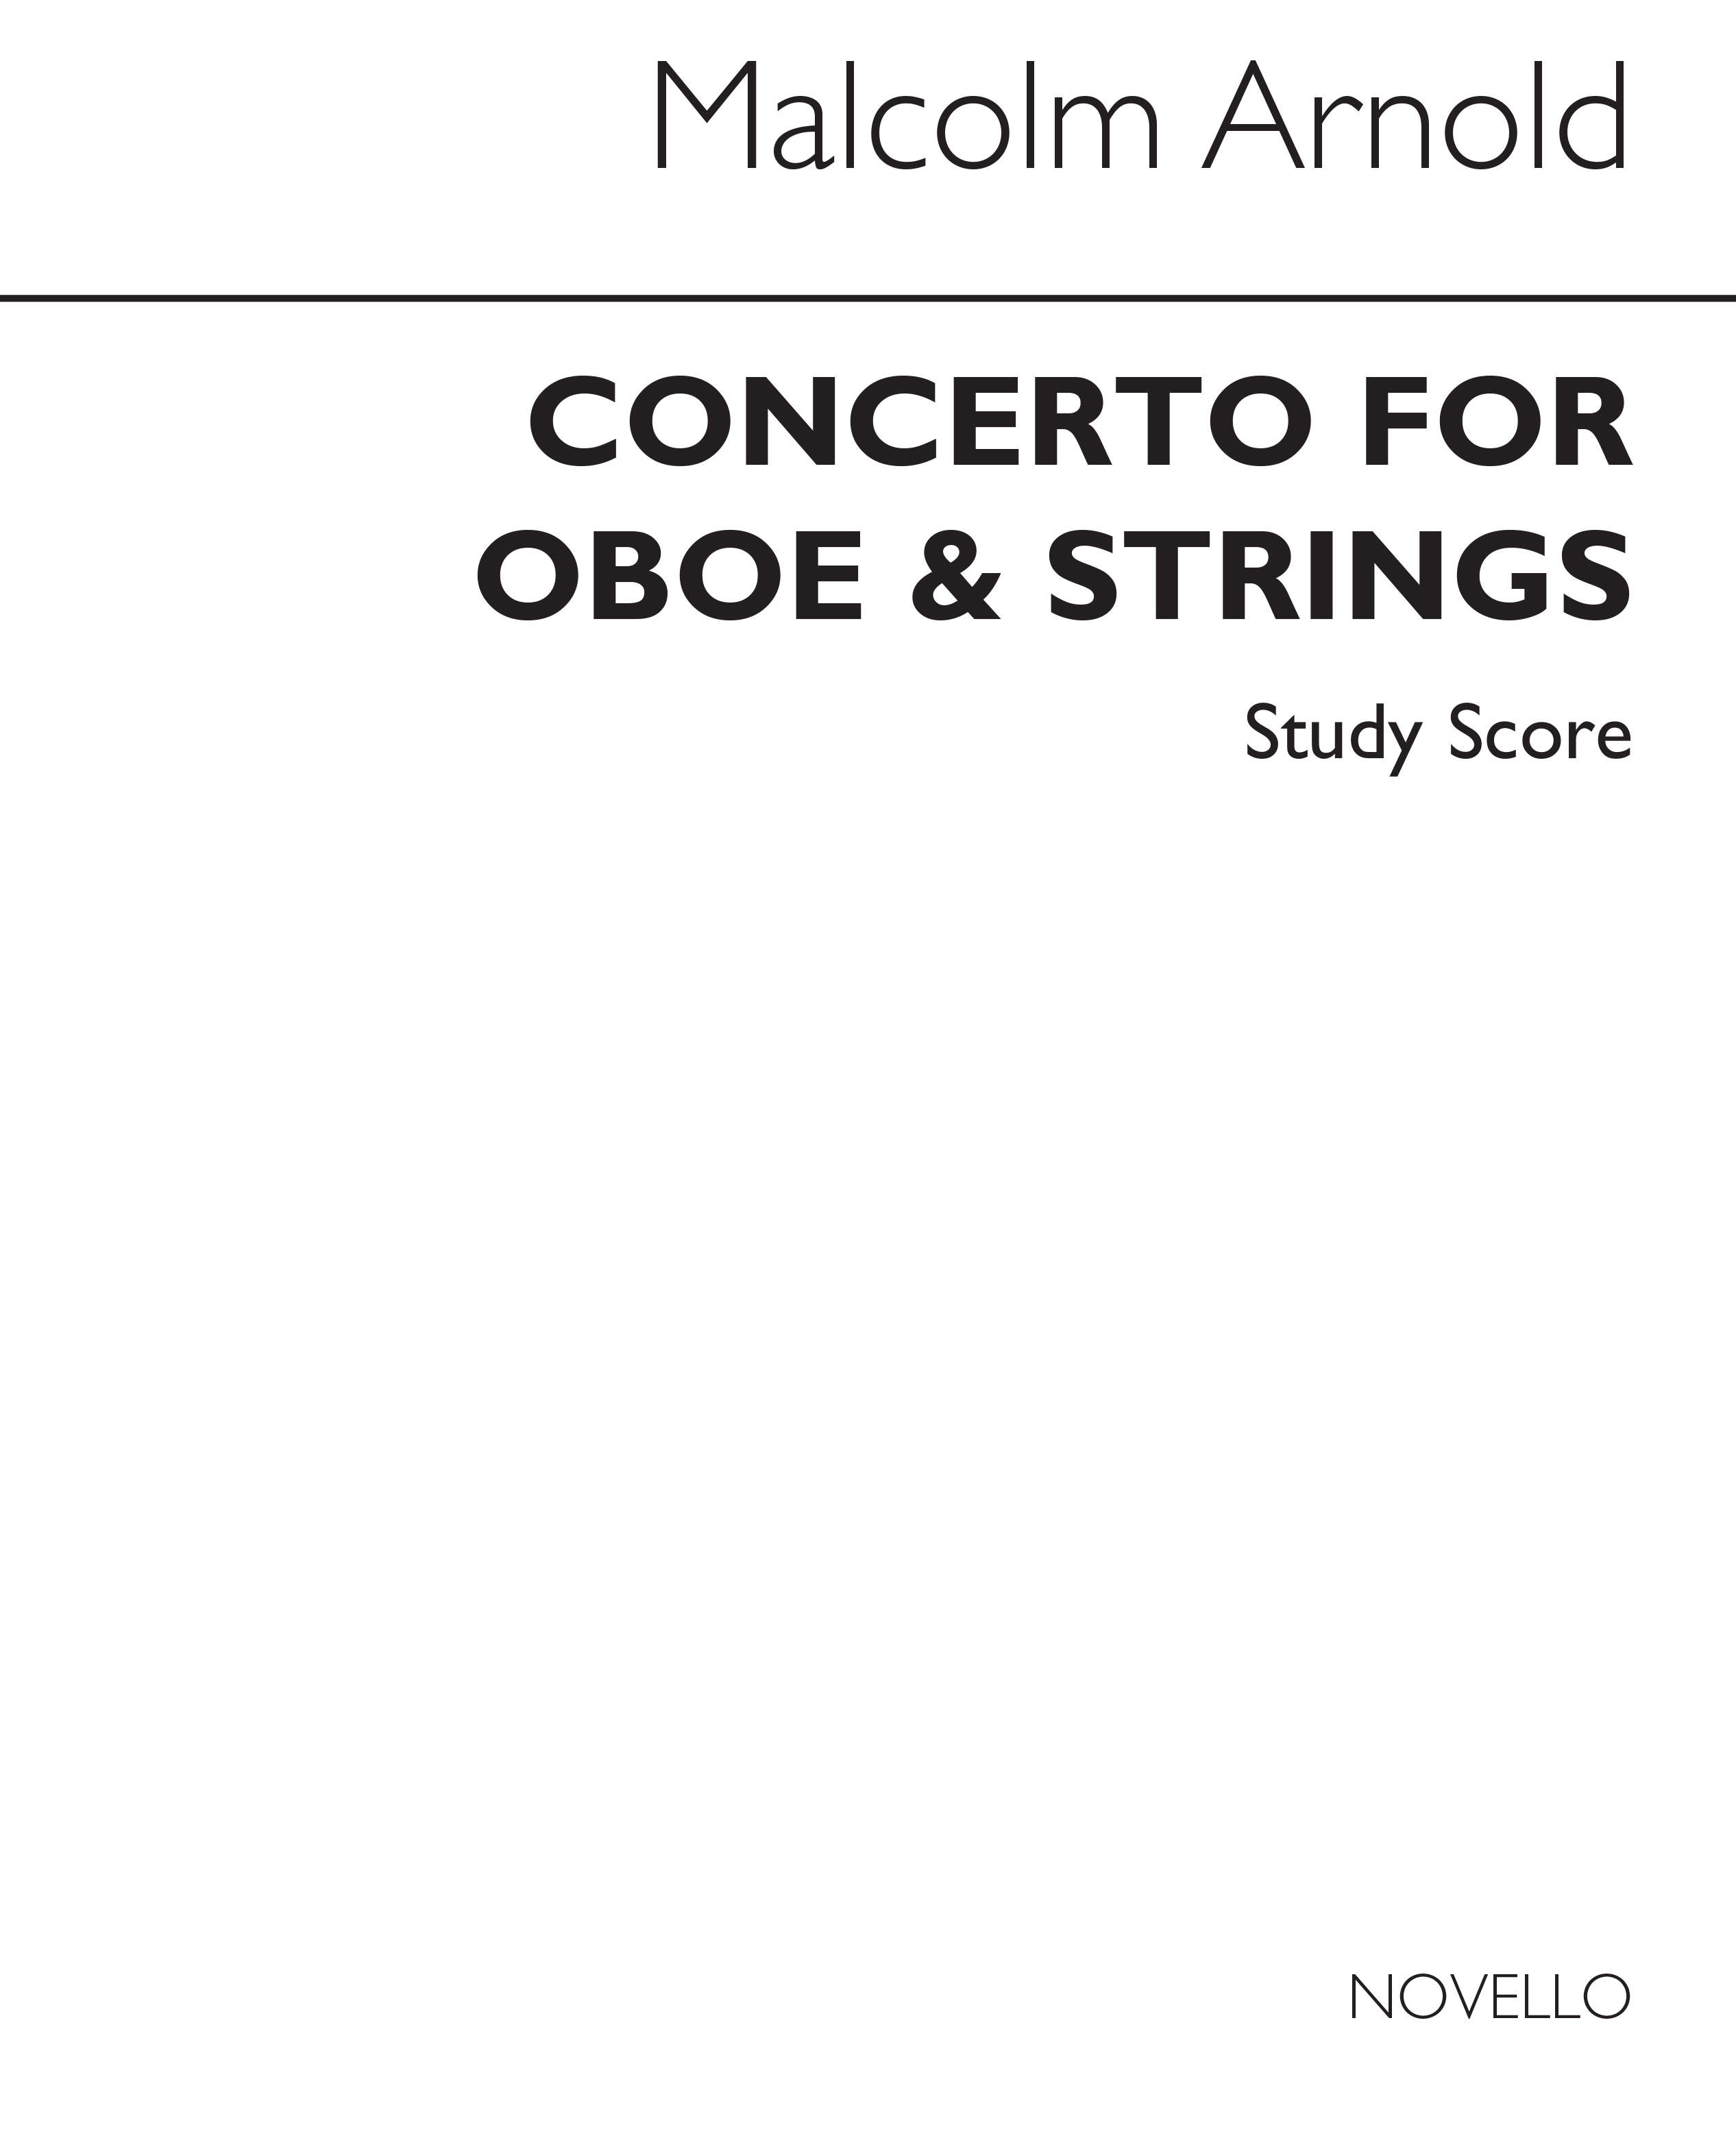 Malcolm Arnold: Concerto For Oboe And Strings Op.39 (Study Score)